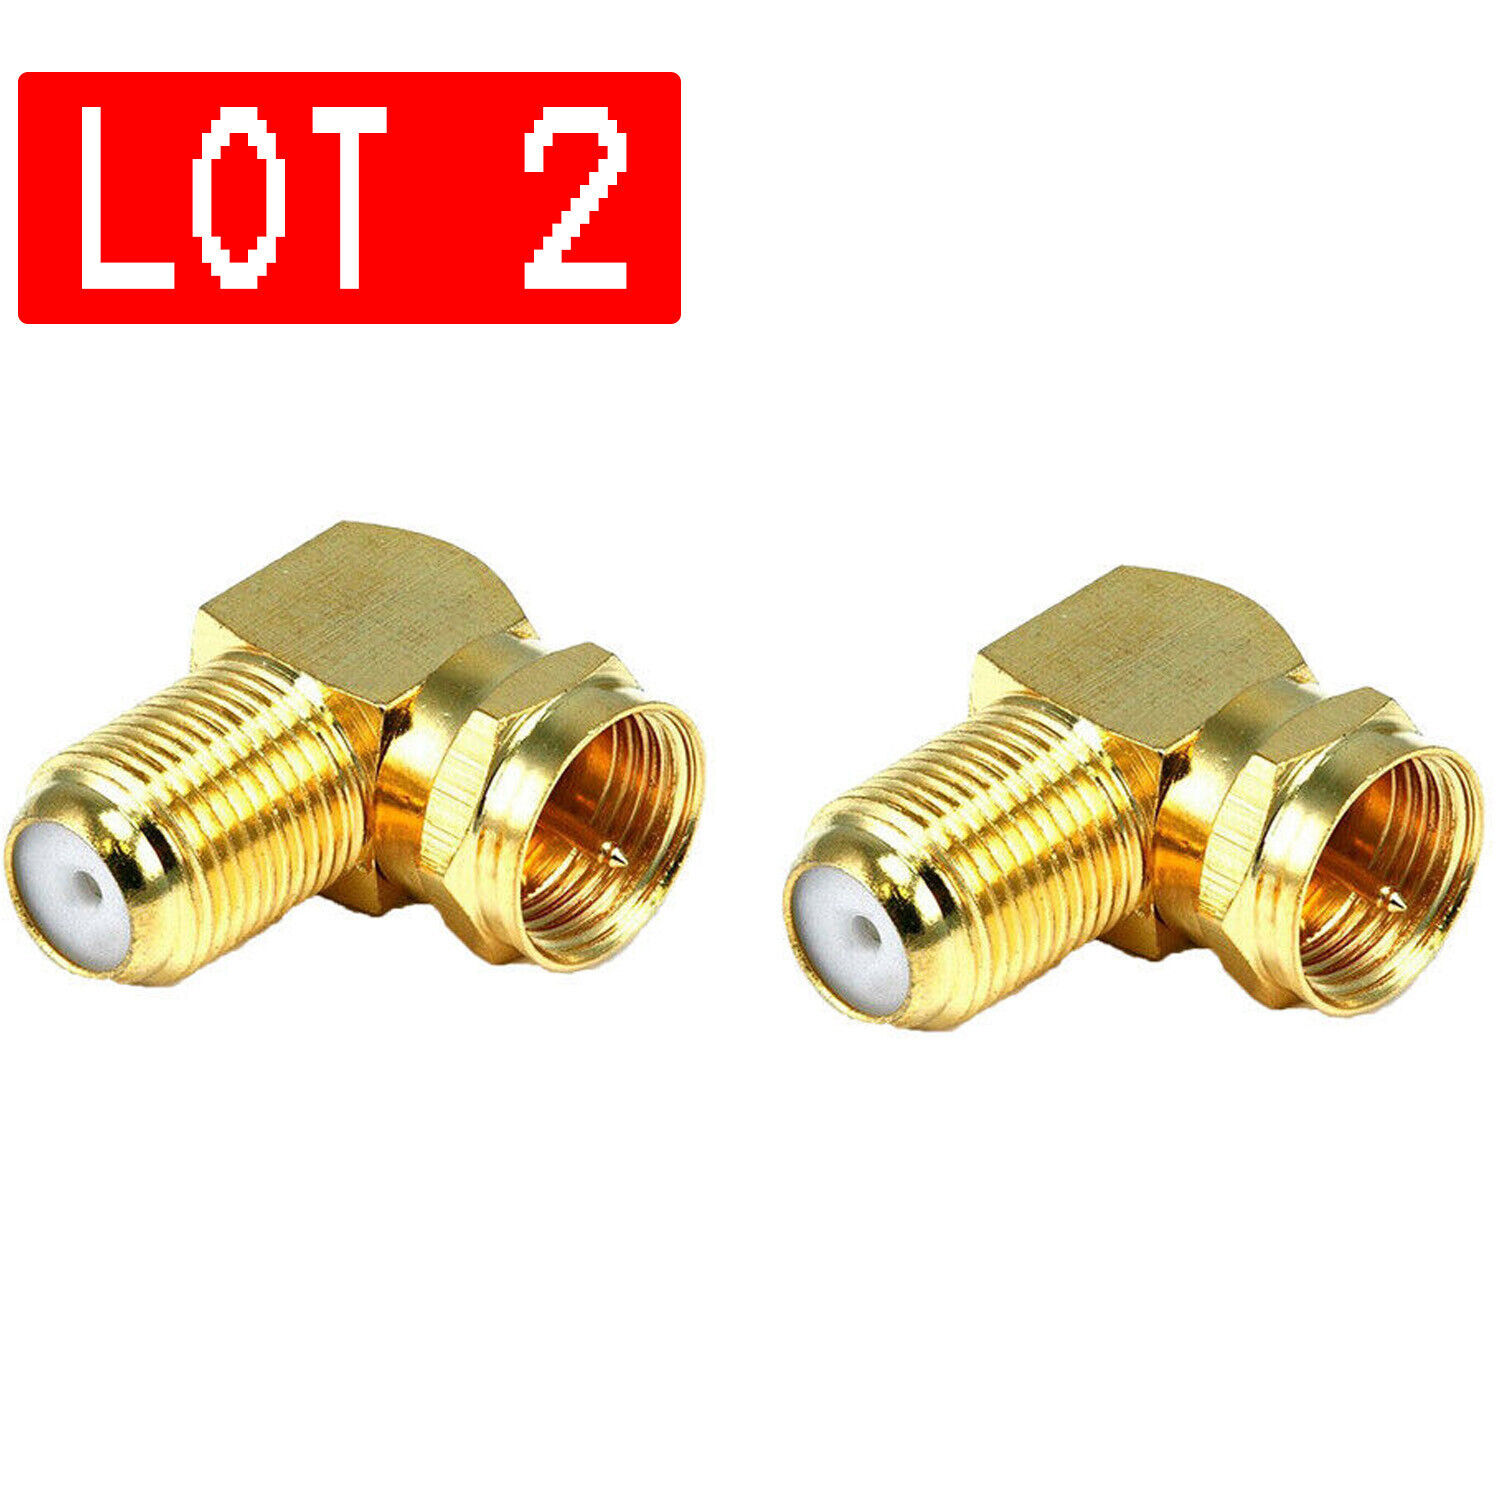 2PCS Gold F Type Male to Female Right Angle 90 Degree Coax Coaxial Cable Adapter Unbranded Does not apply